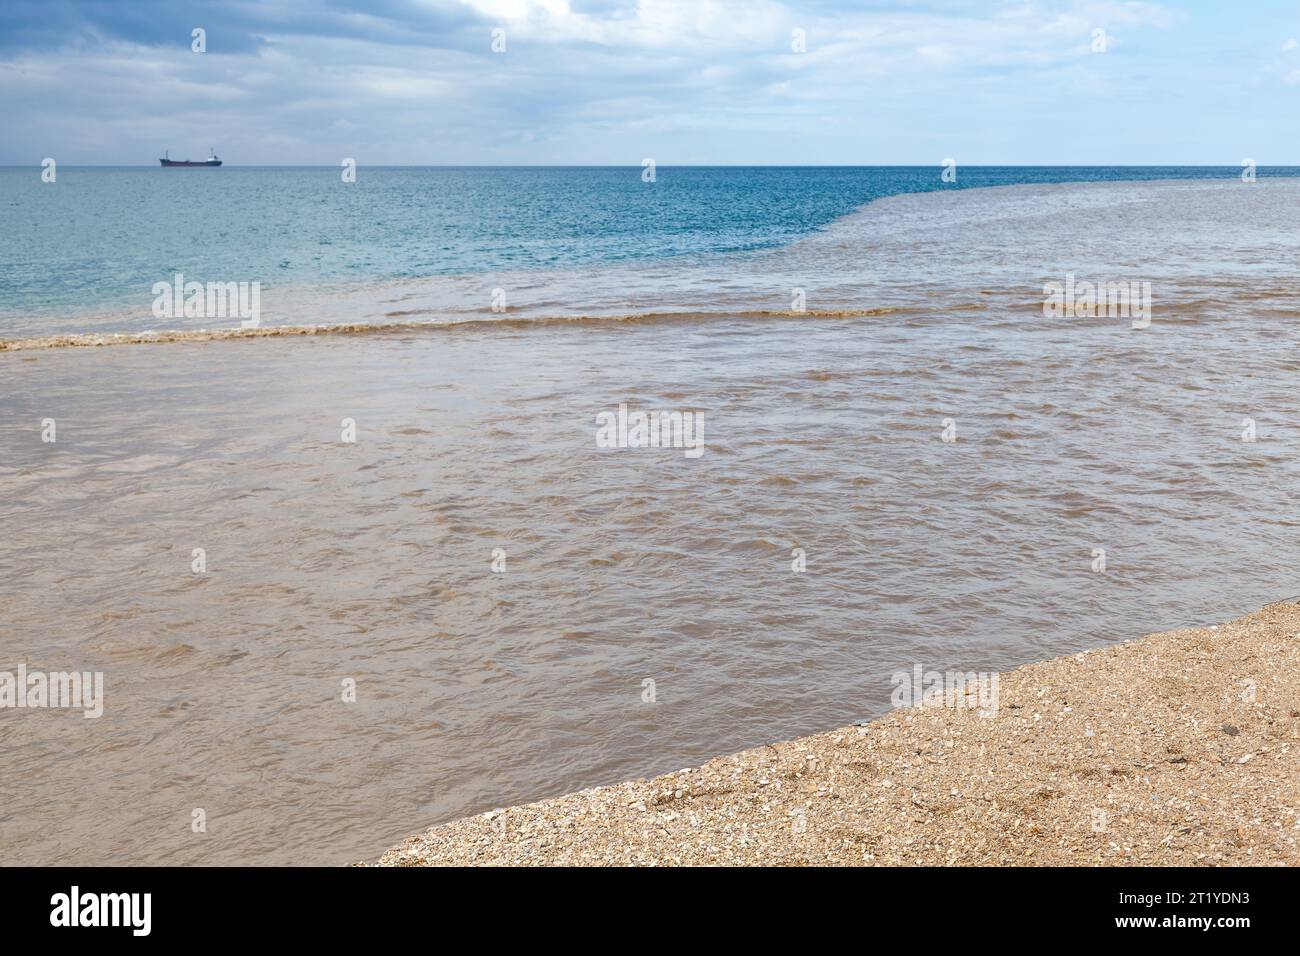 Summer coastal landscape with muddy river water mixing with blue seawater. Crimea, Black Sea coast Stock Photo